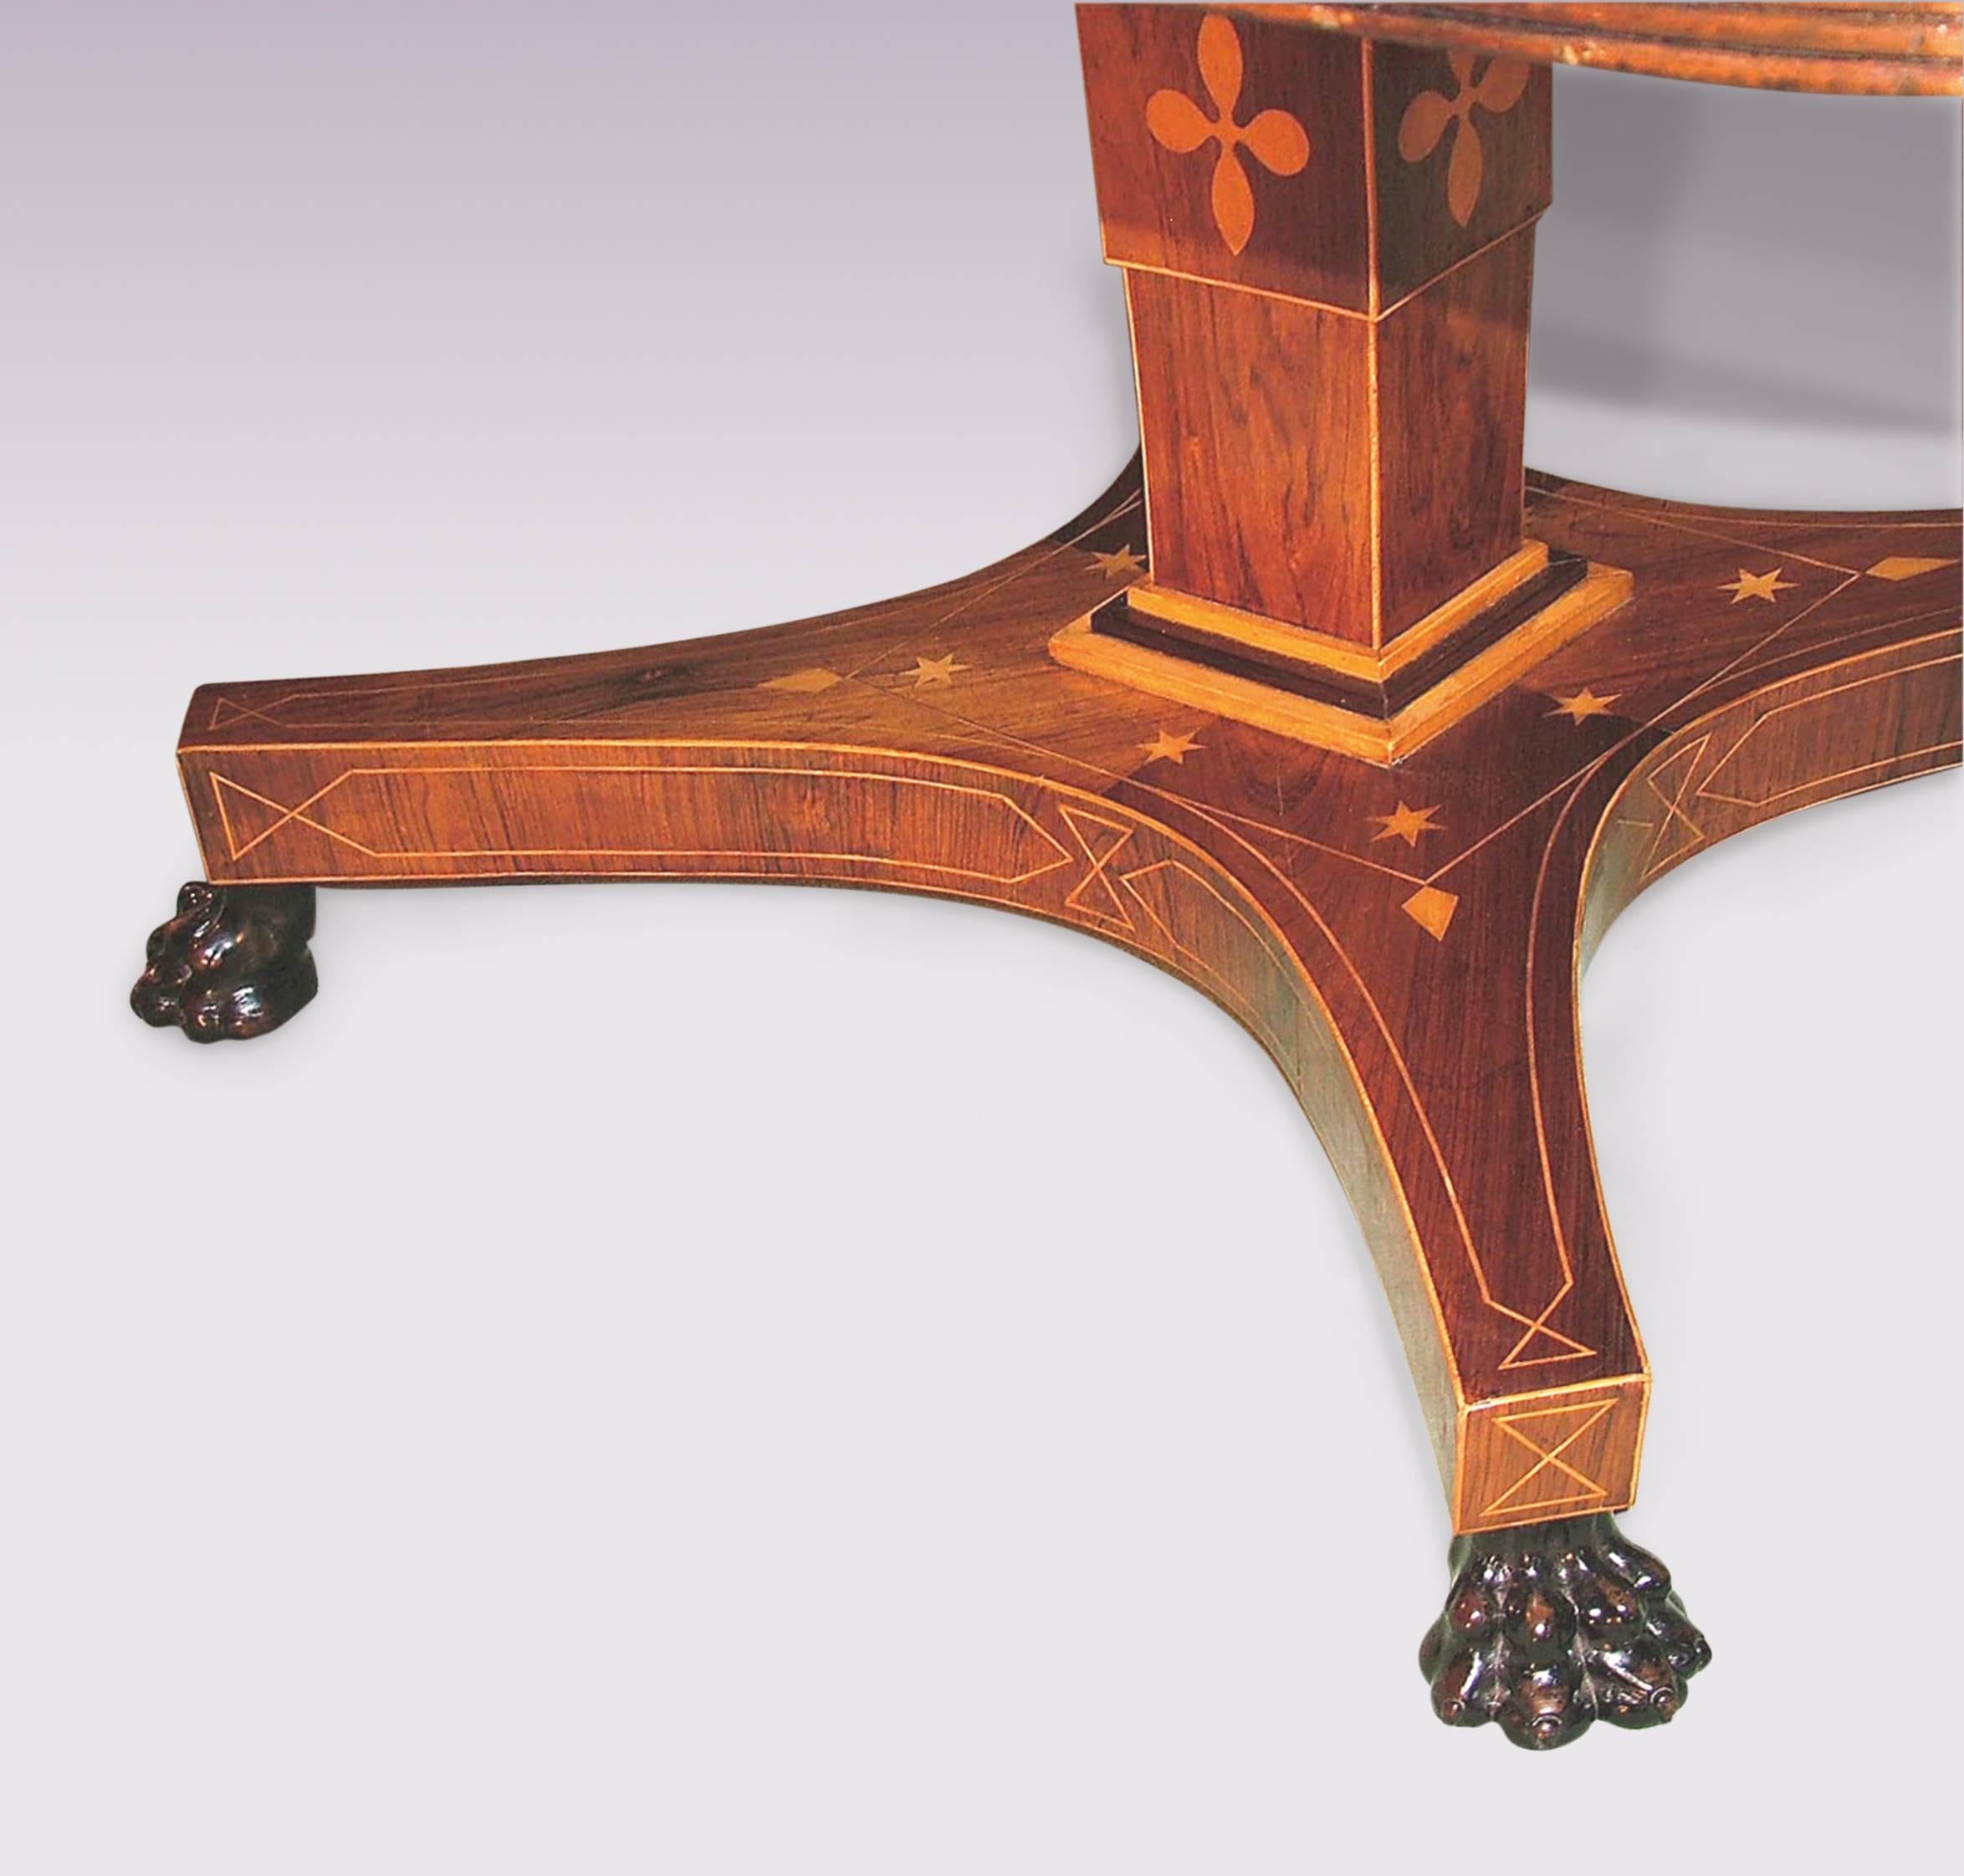 A fine early 19th century Regency period rosewood Breakfast Table having reeded edged ,satinwood crossbanded ,boxwood and ebony strung rectangular top raised on rectangular column with floral inlaid collar, and boxwood star and line inlaid platform